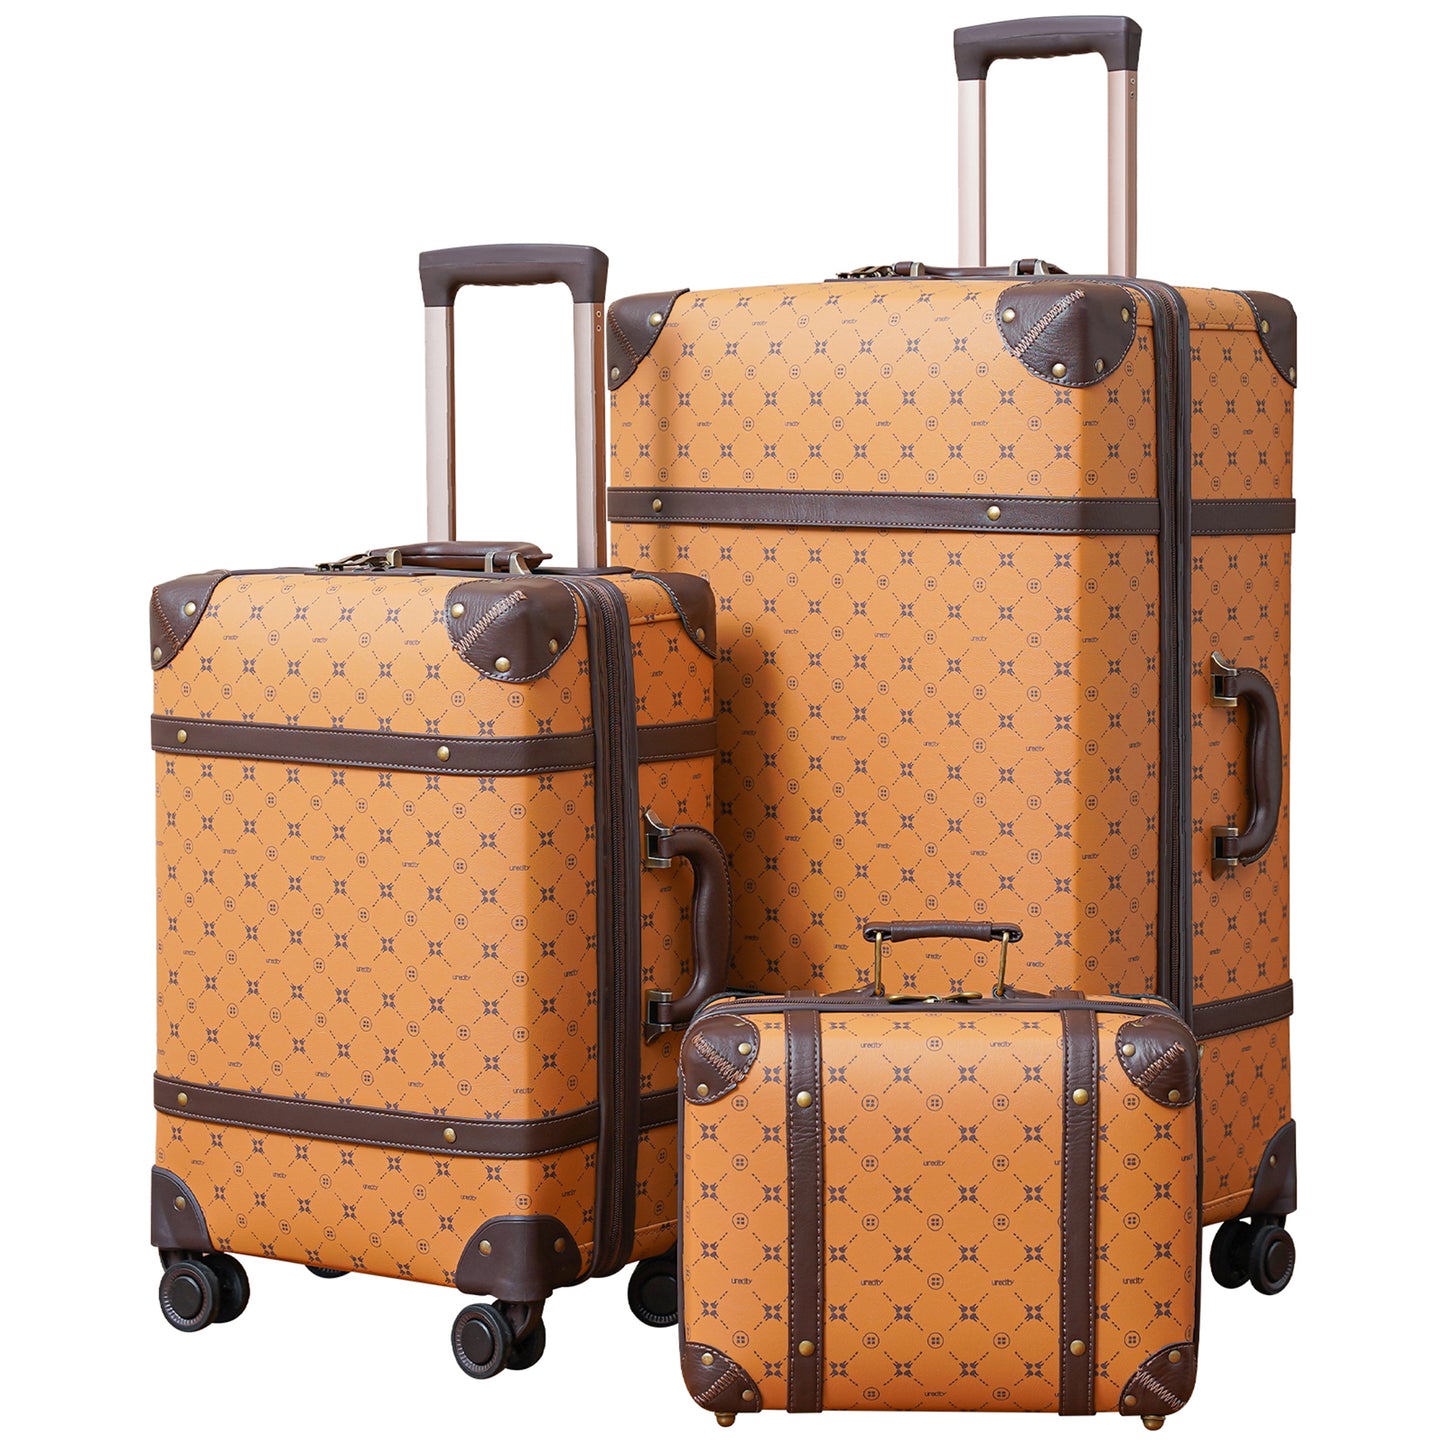 NZBZ 3 Pieces Vintage Luggage Set Cute Vintage Trunk Luggage 3 Pieces Retro Suitcase Set for Travel with Spinner Wheels, TSA Lock and Beauty Case